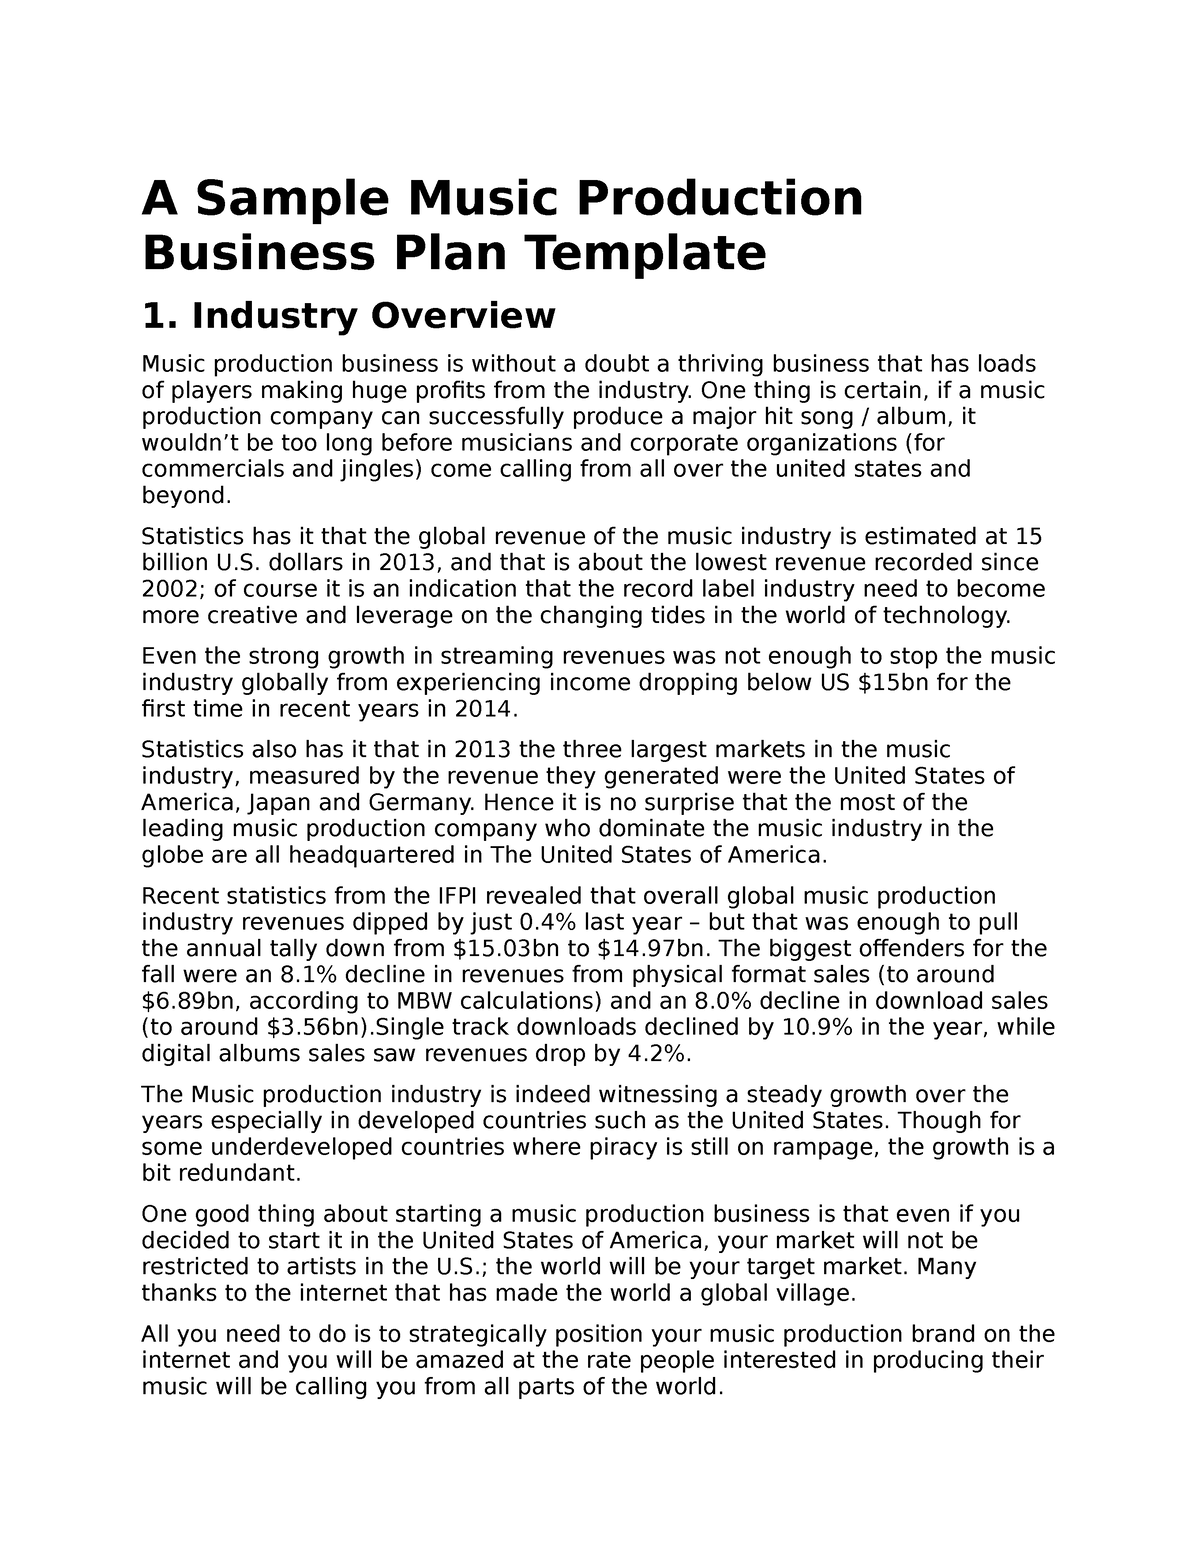 business plan for music production company pdf